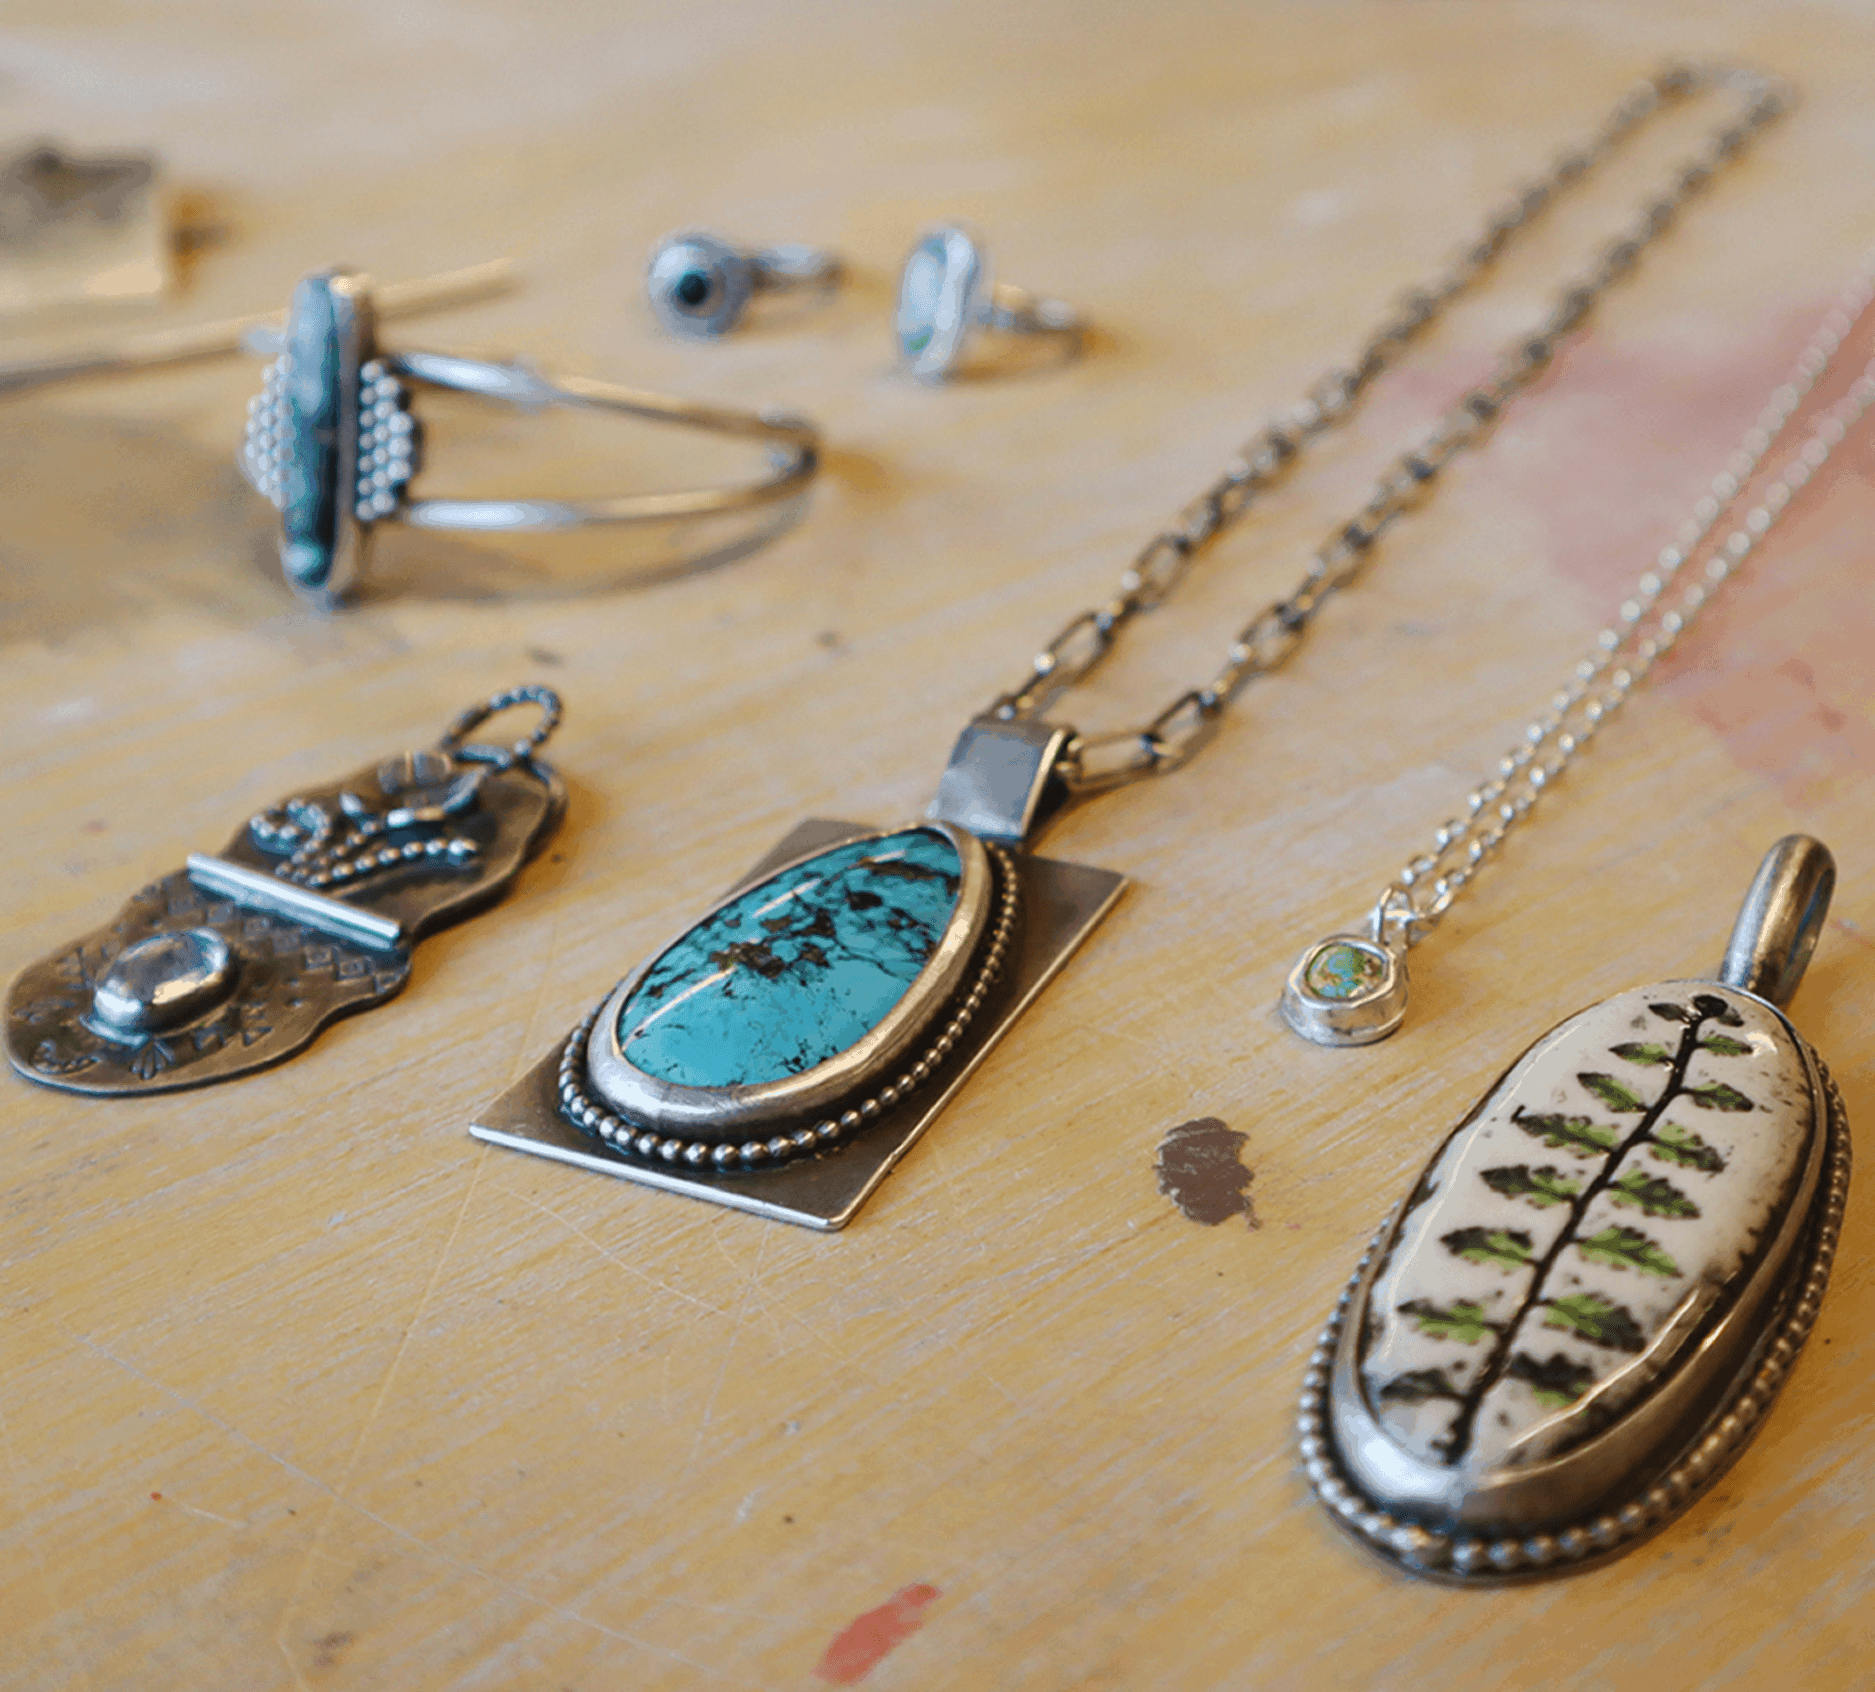 Several metal and stone necklaces, rings and a bracelet laid on a wooden surface